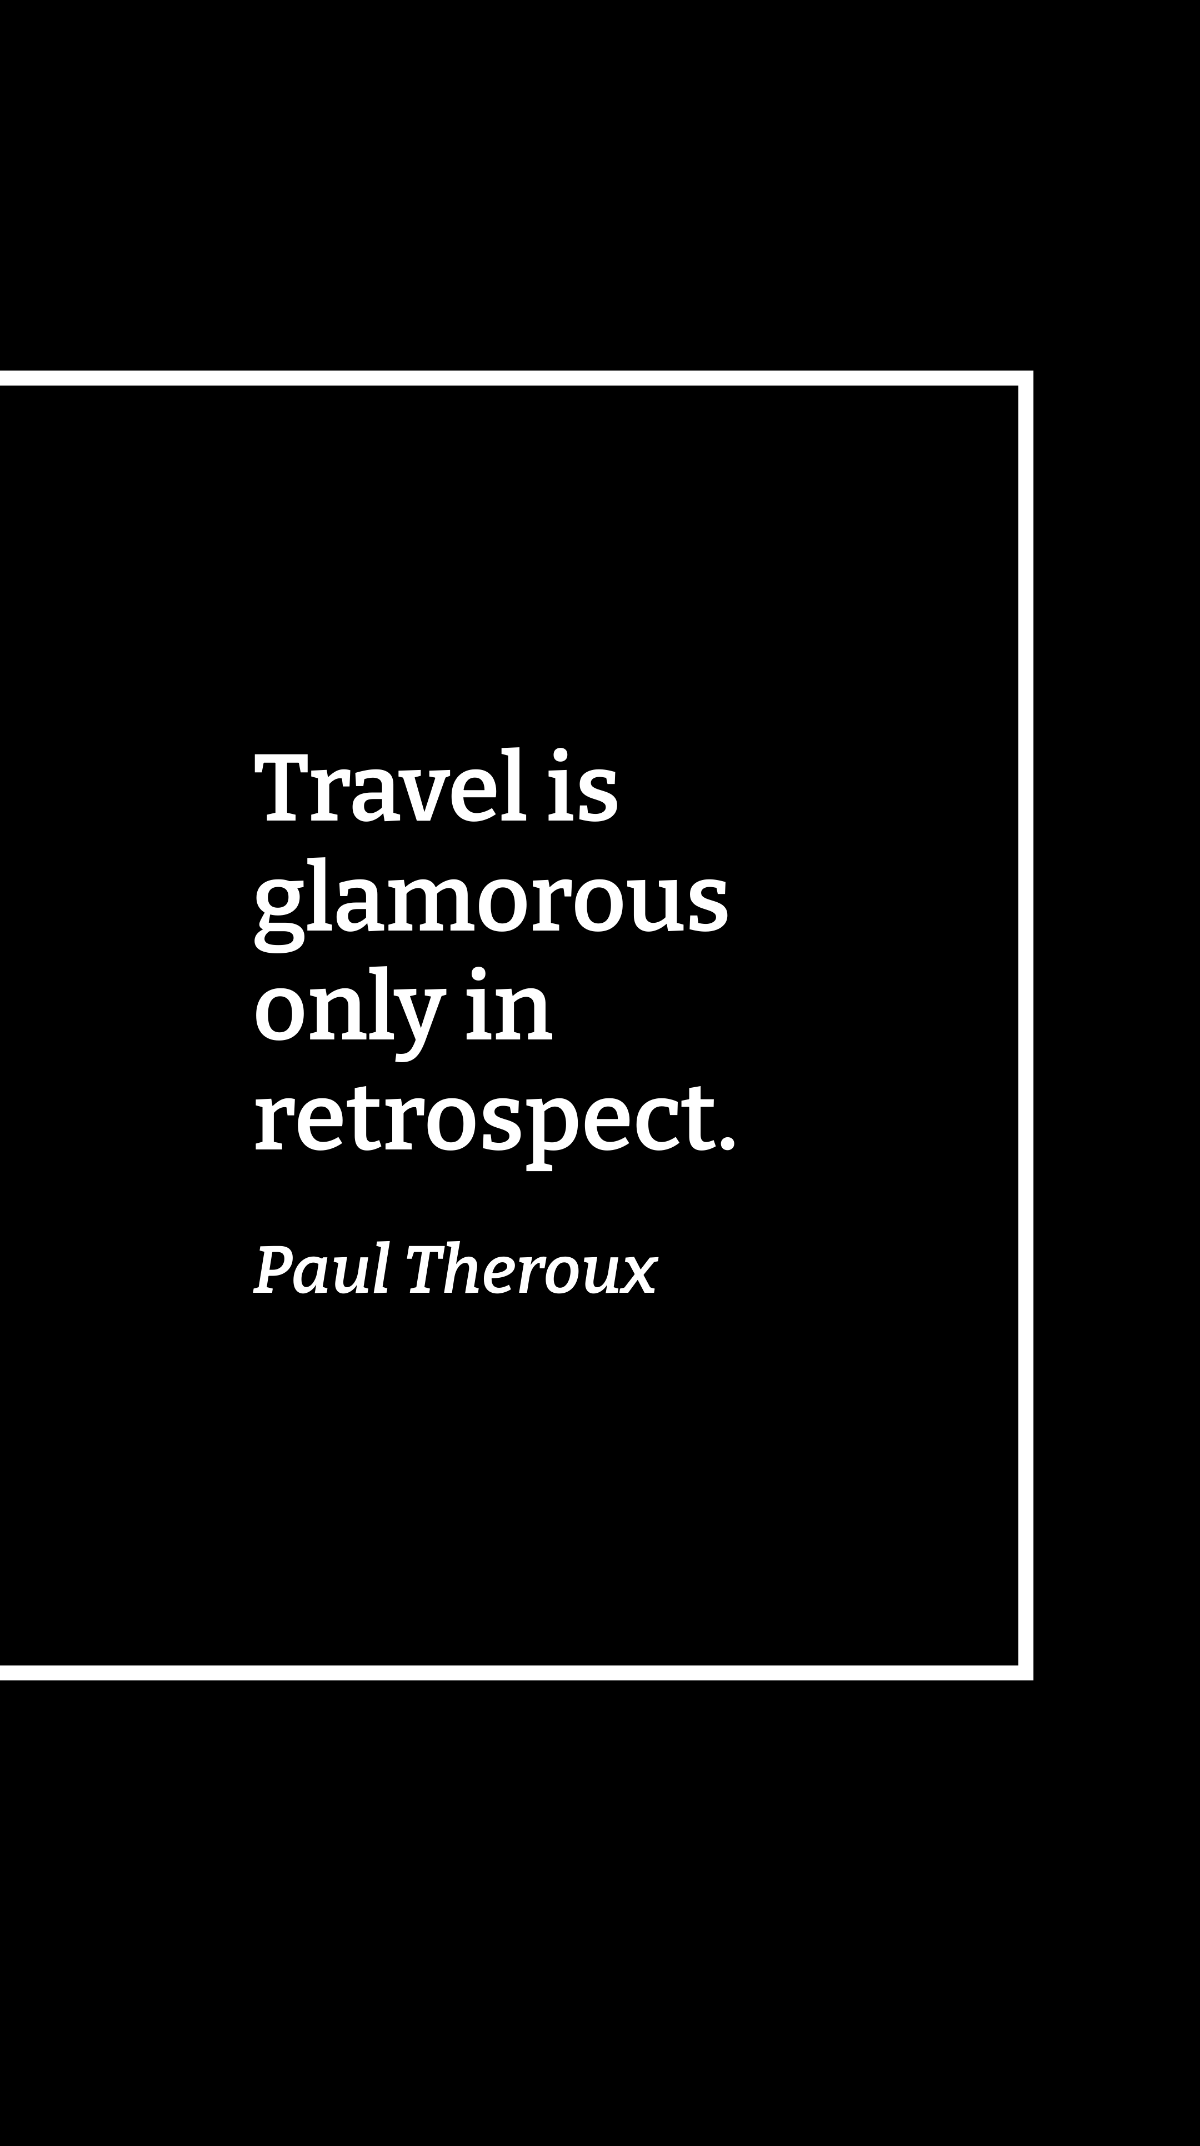 Free Paul Theroux - Travel is glamorous only in retrospect. Template